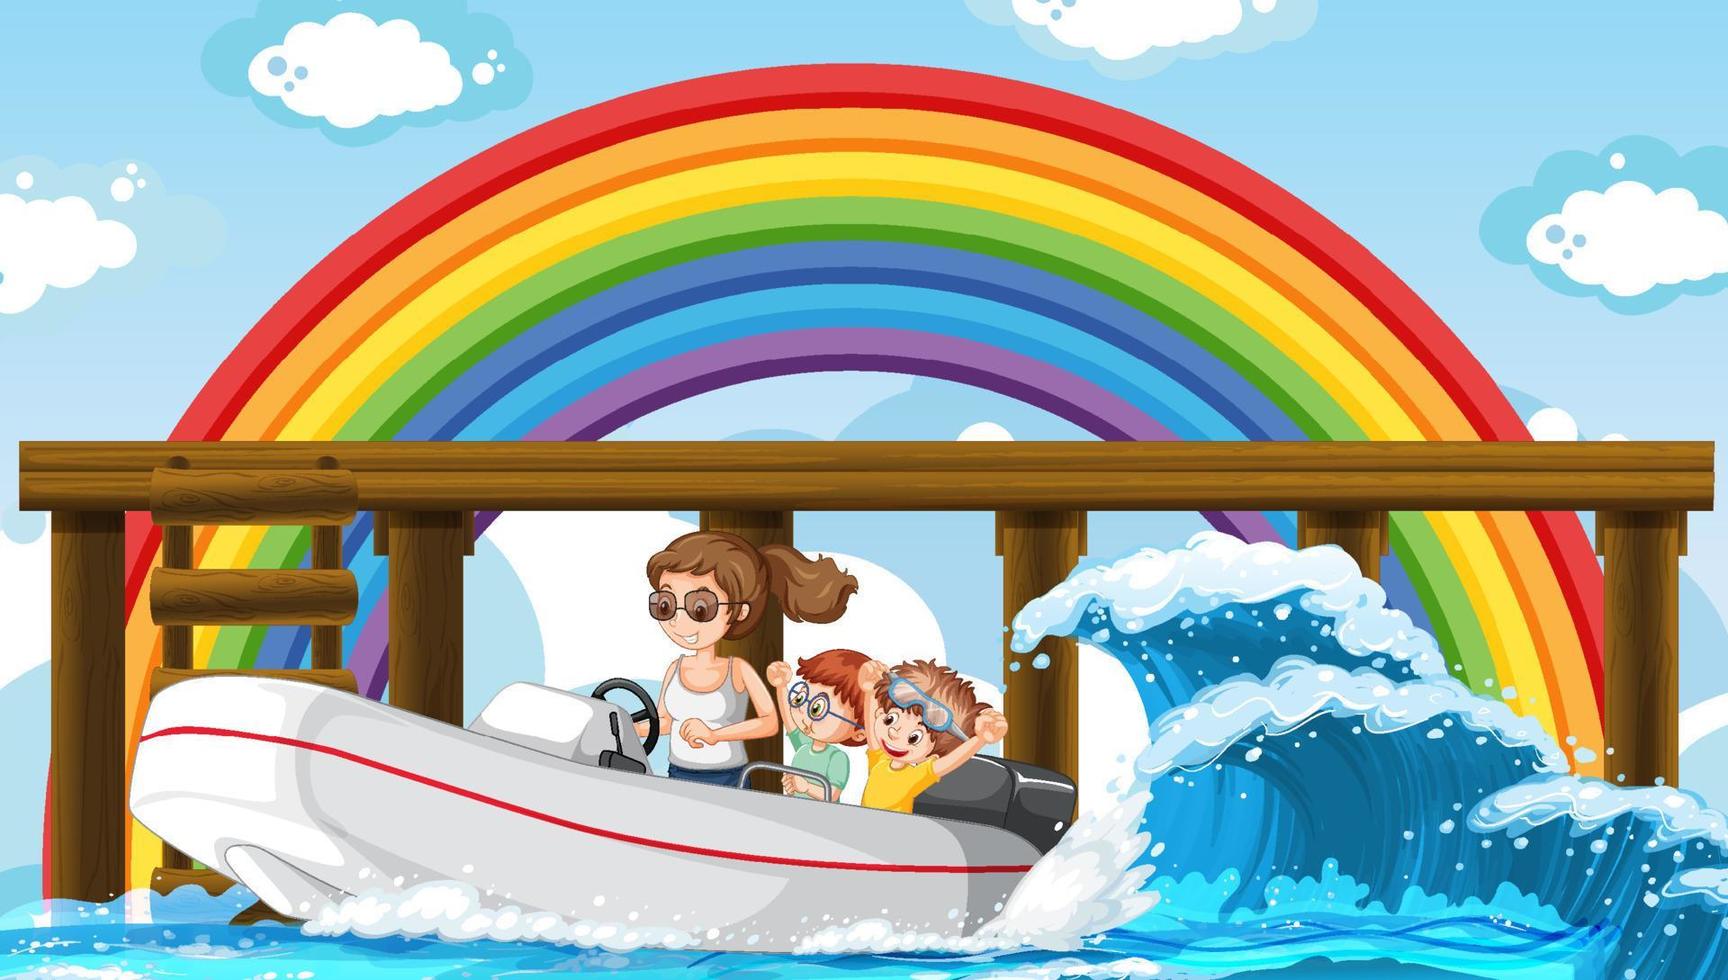 A woman driving motorboat with rainbow in the sky background vector